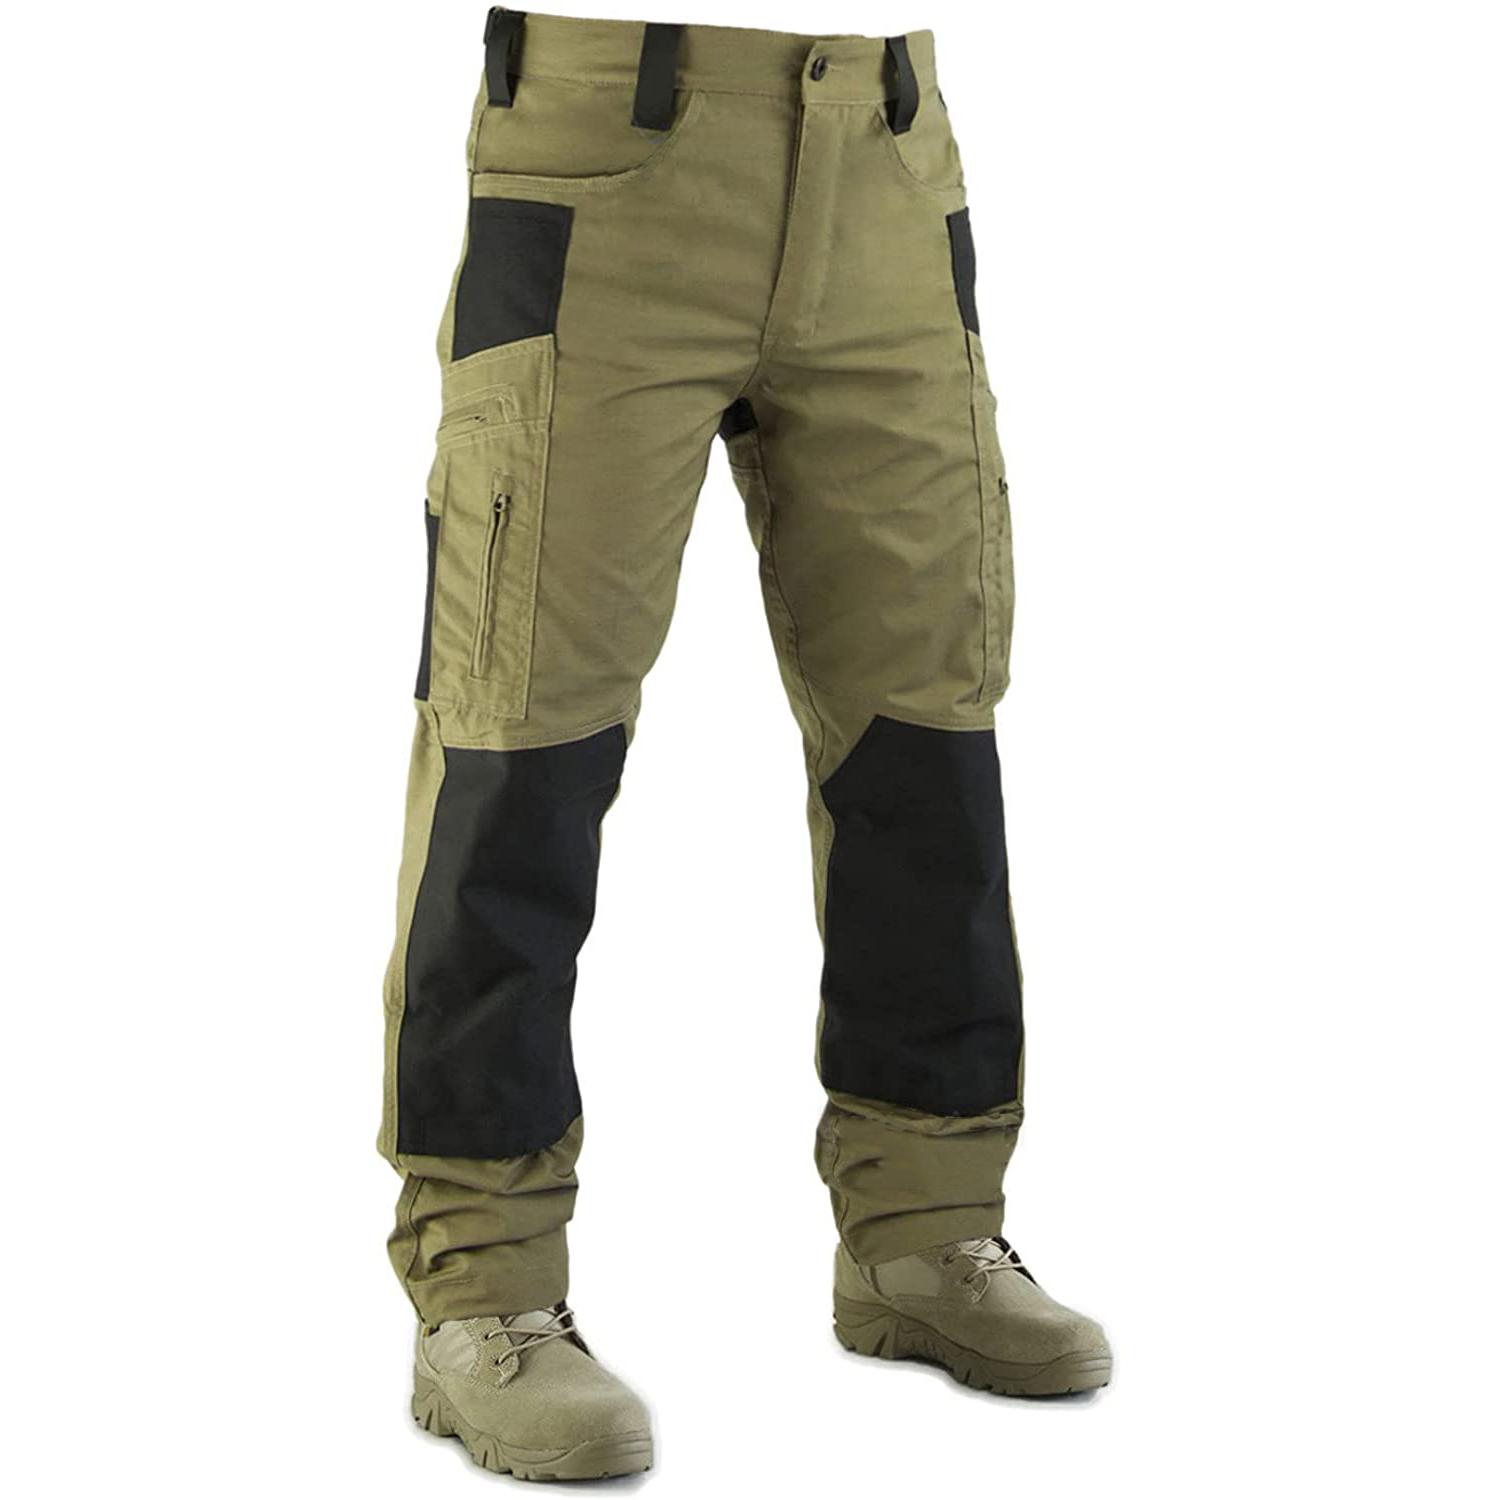 Men's Tactical Multi-pockets Splicing Chic Outdoor Casual Cargo Pants